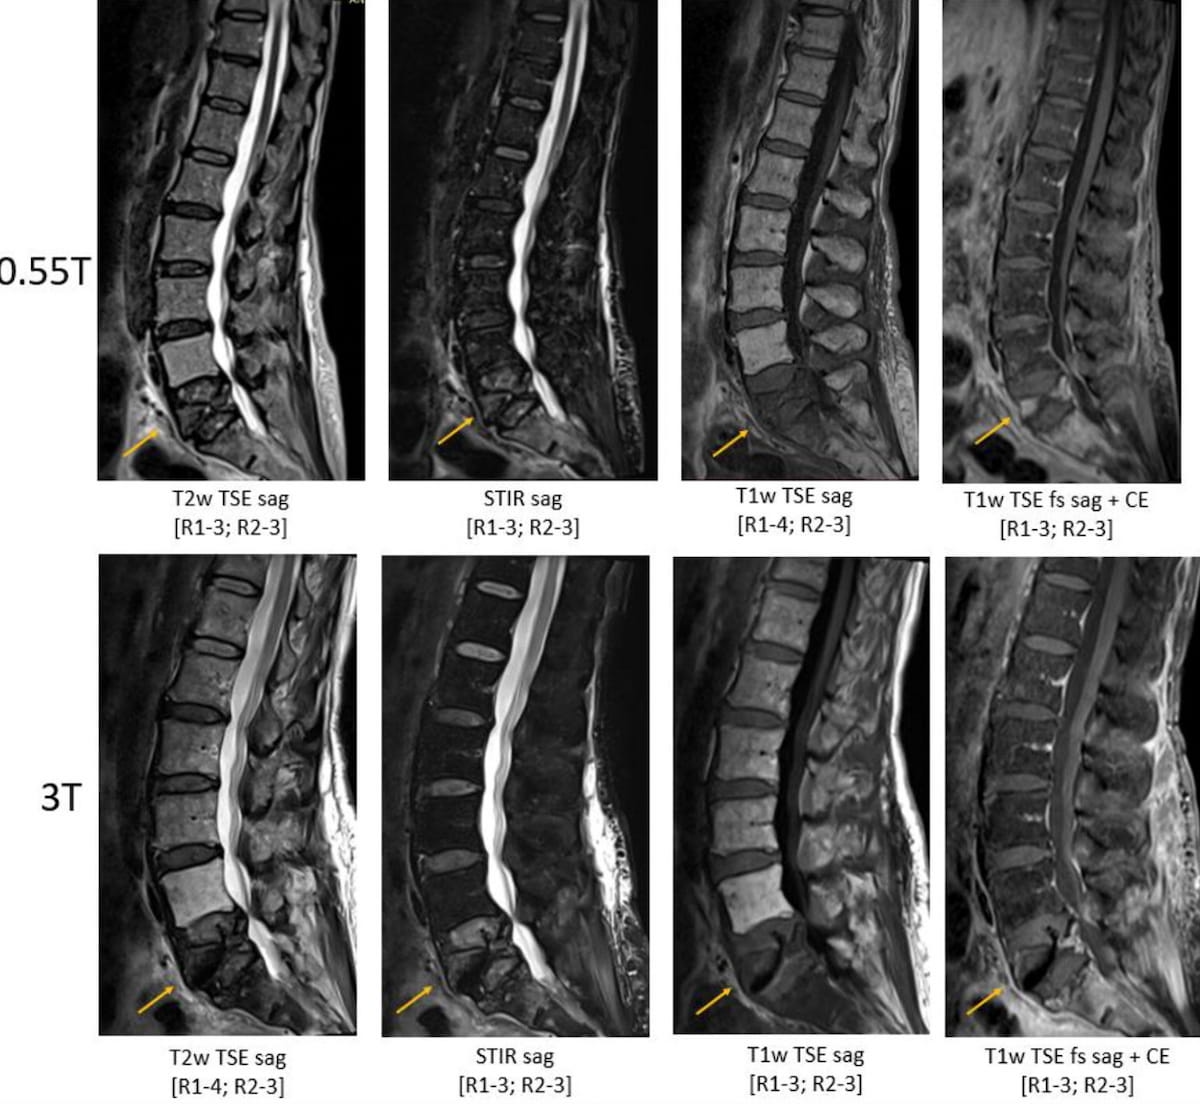 Study Says Low-Field MRI Offers Sufficient Diagnostic Quality for Detecting Spinal Pathology